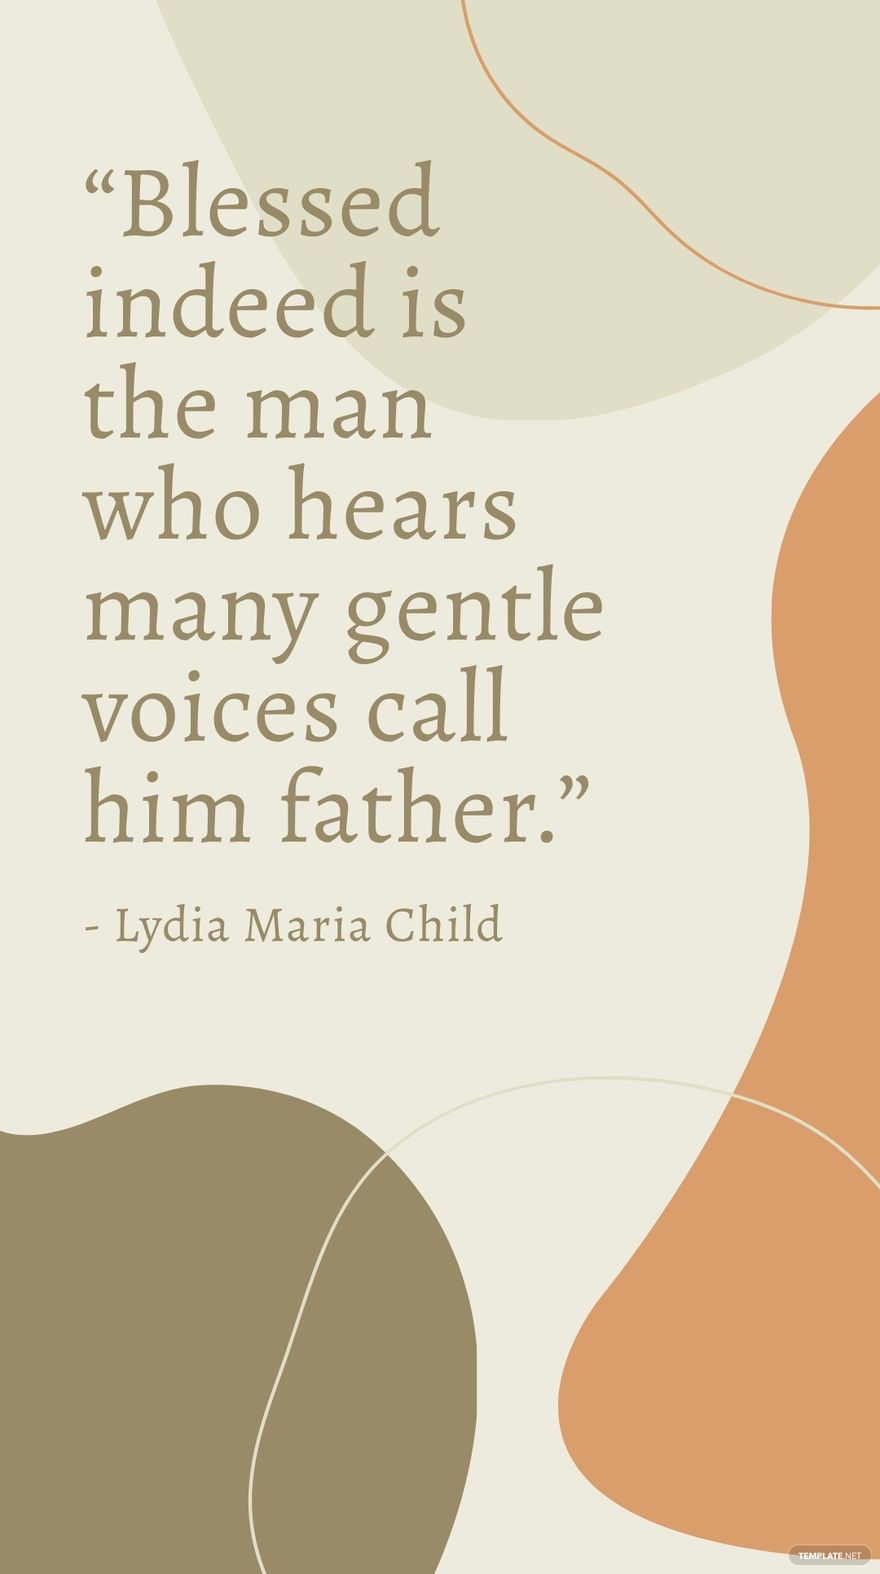 Lydia Maria Child - “Blessed indeed is the man who hears many gentle voices call him father.”